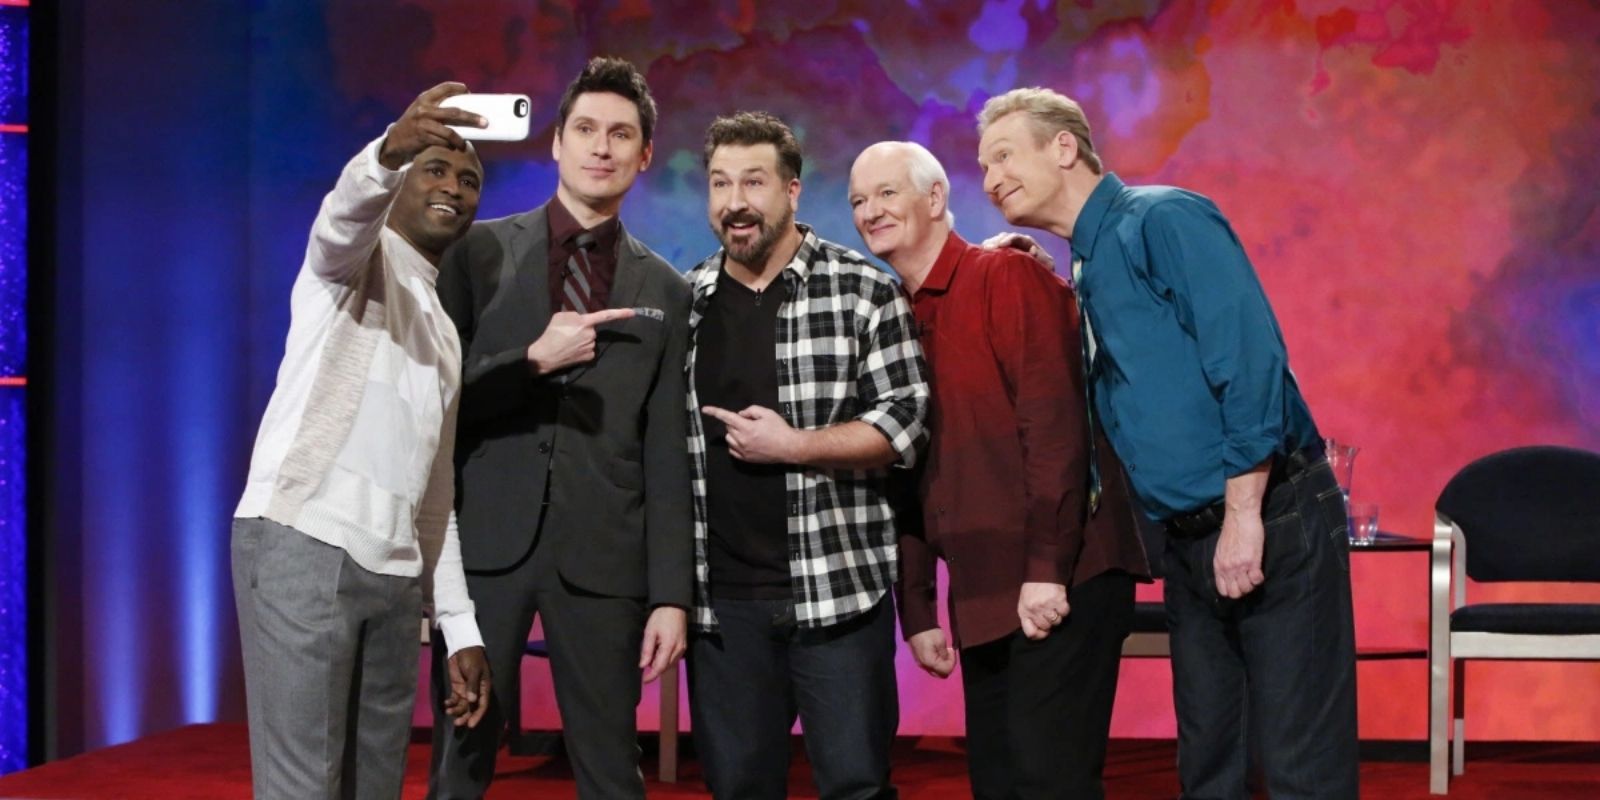 Joey Fatone in Whose Line Is It Anyway